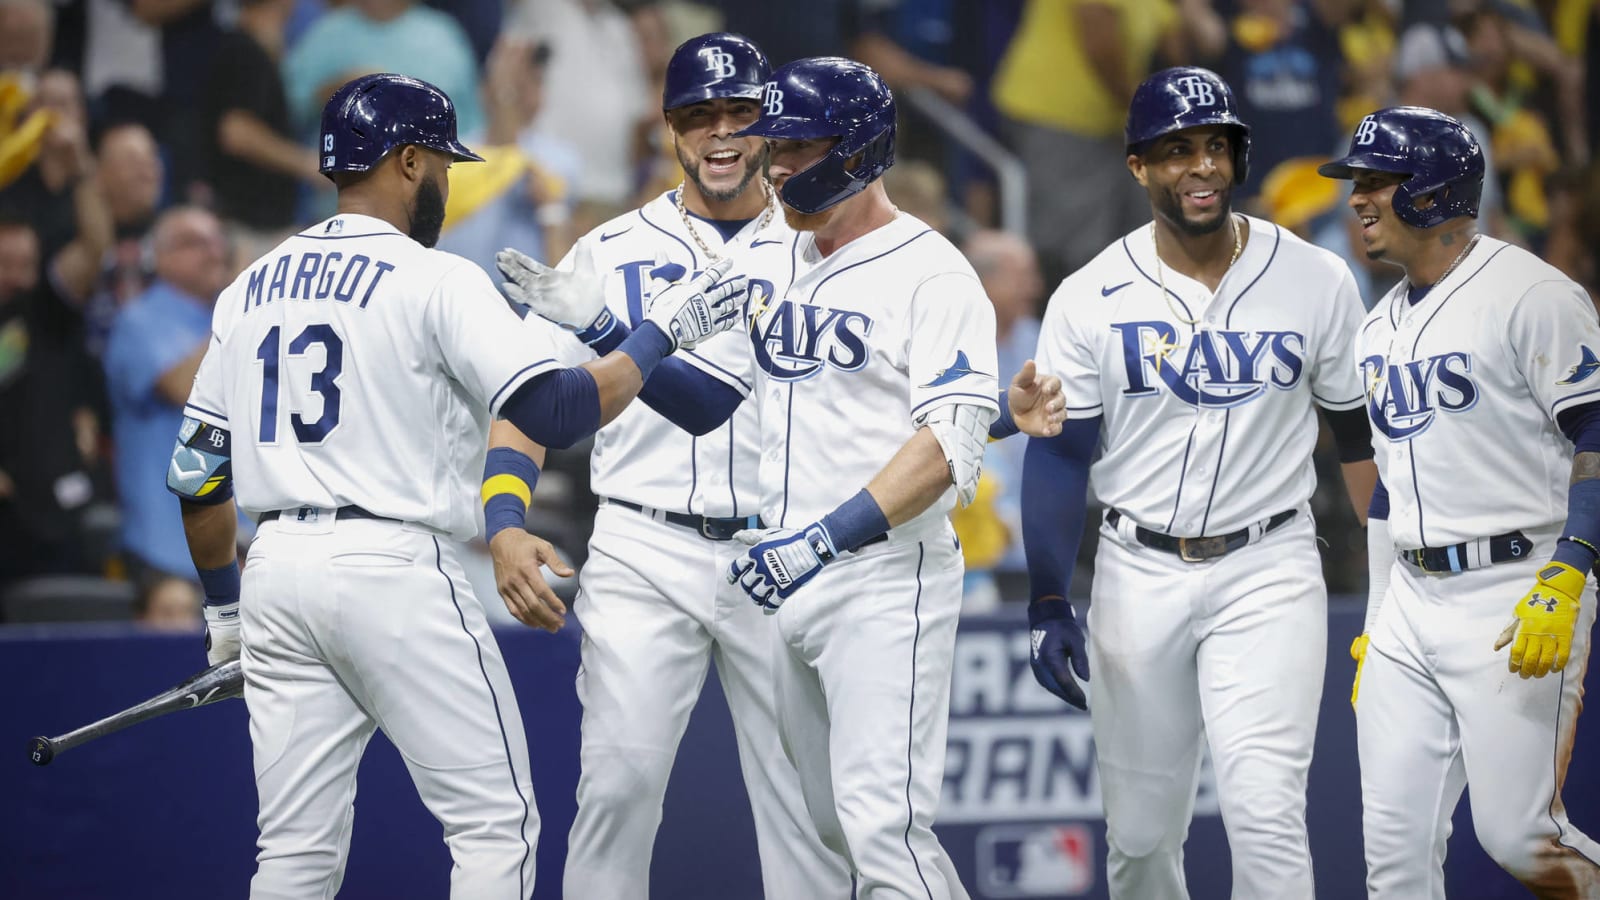 What's left for the Rays after the lockout?